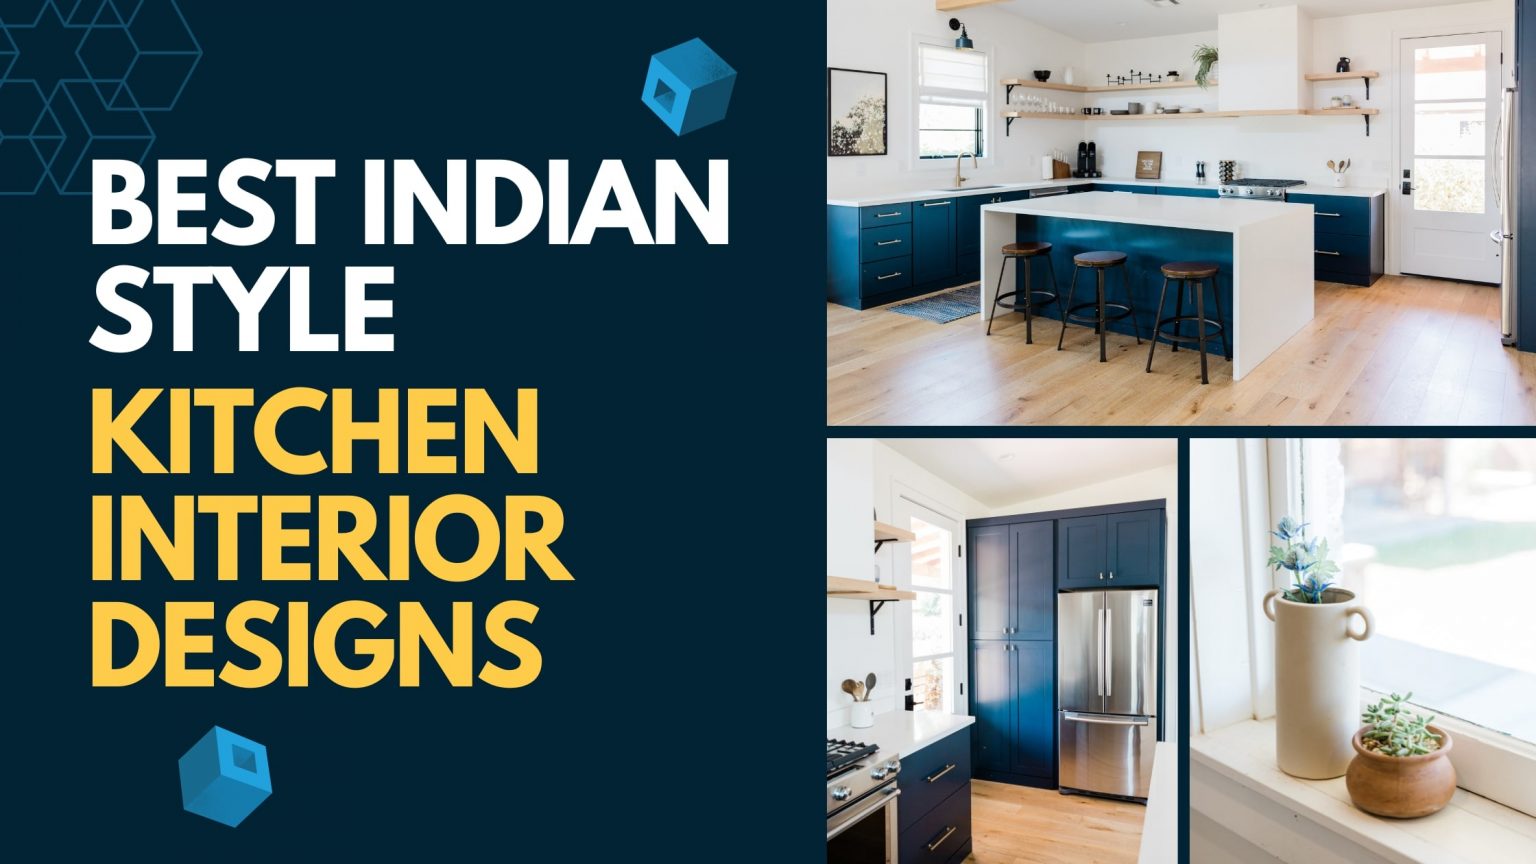 Best Indian Style Kitchen Interior Designs to Choose From!